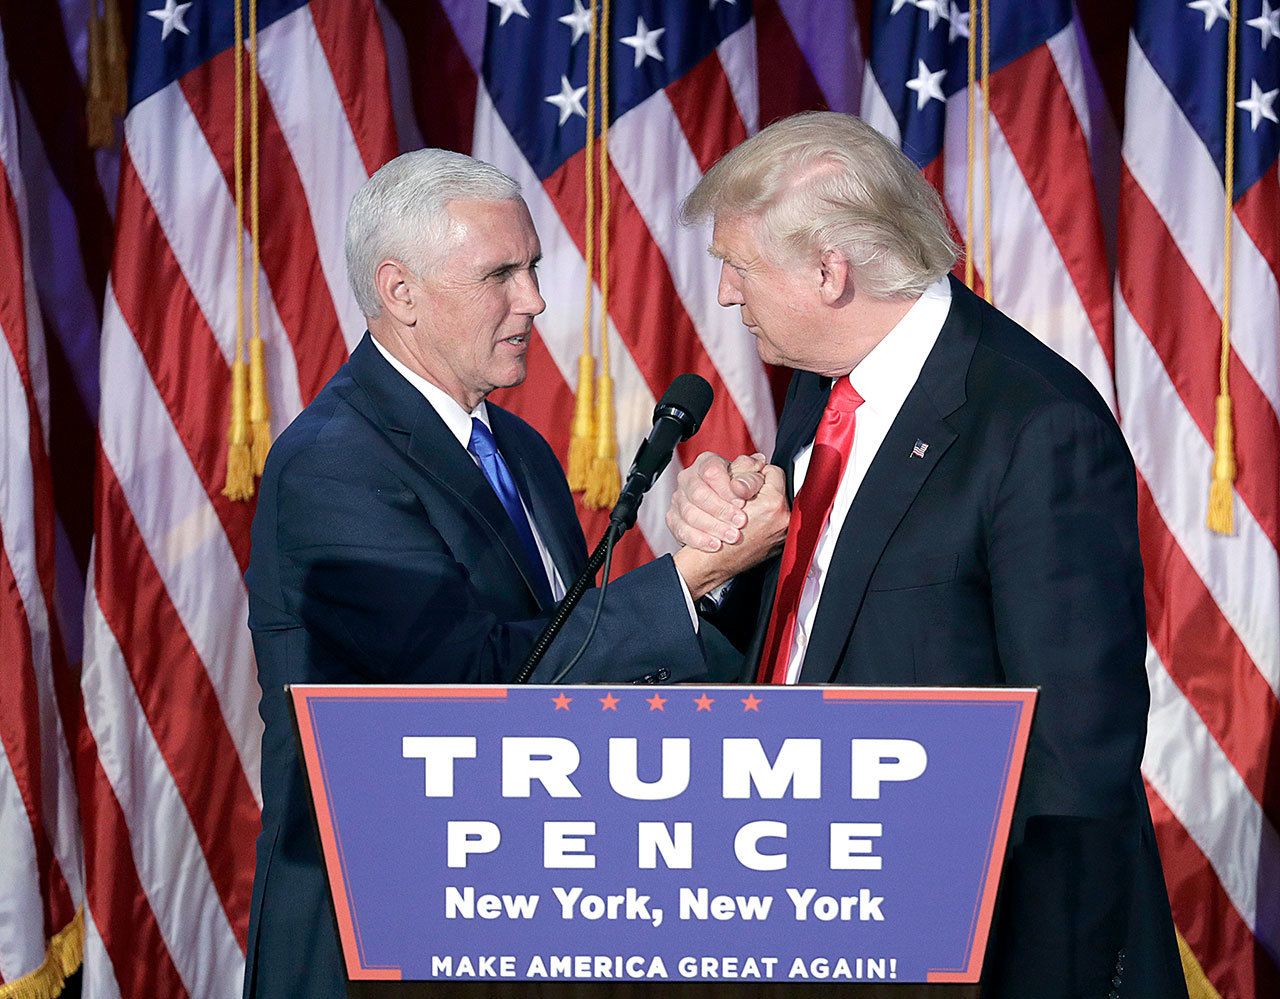 President-elect Donald Trump shakes hands with Vice President-elect Mike Pence as he gives his acceptance speech during his election night rally in New York City. (John Locher/The Associated Press)